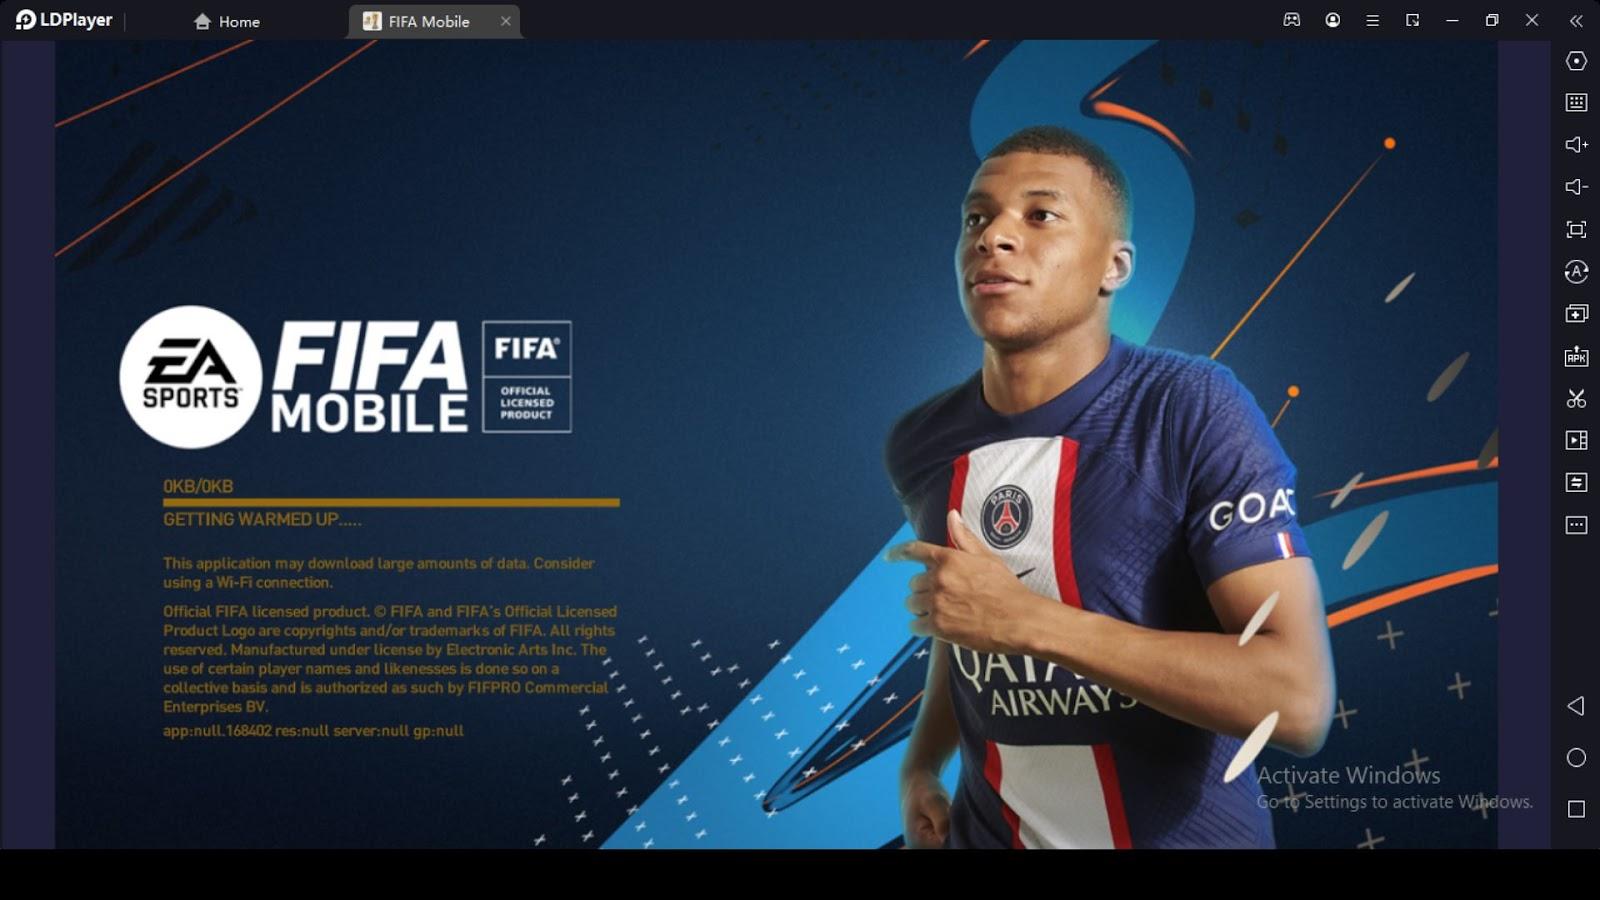 EA SPORTS FC MOBILE 24 SOCCER Beginner Guide – Tips and Tricks to